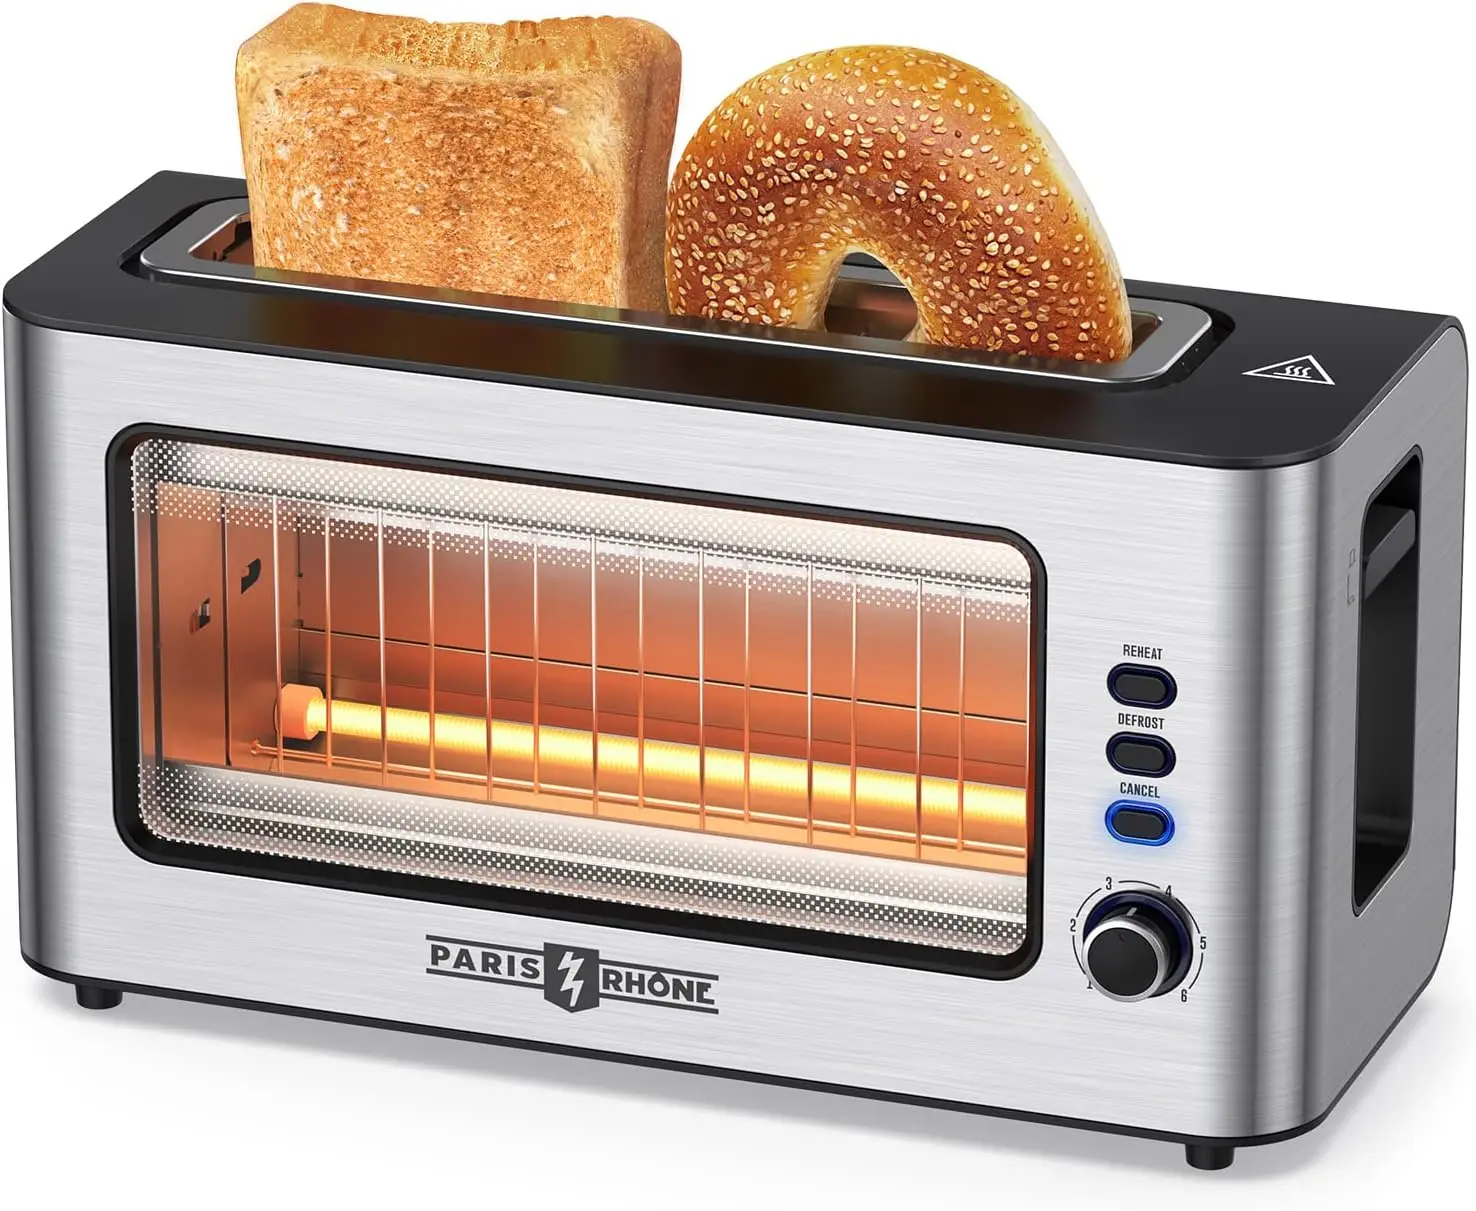 

Paris Rhône Toaster 2 Slice Extra Wide Long Slot Retro Toaster with Easy View Window, 6 Levels, Easy to Clean, Auto Shutoff, S